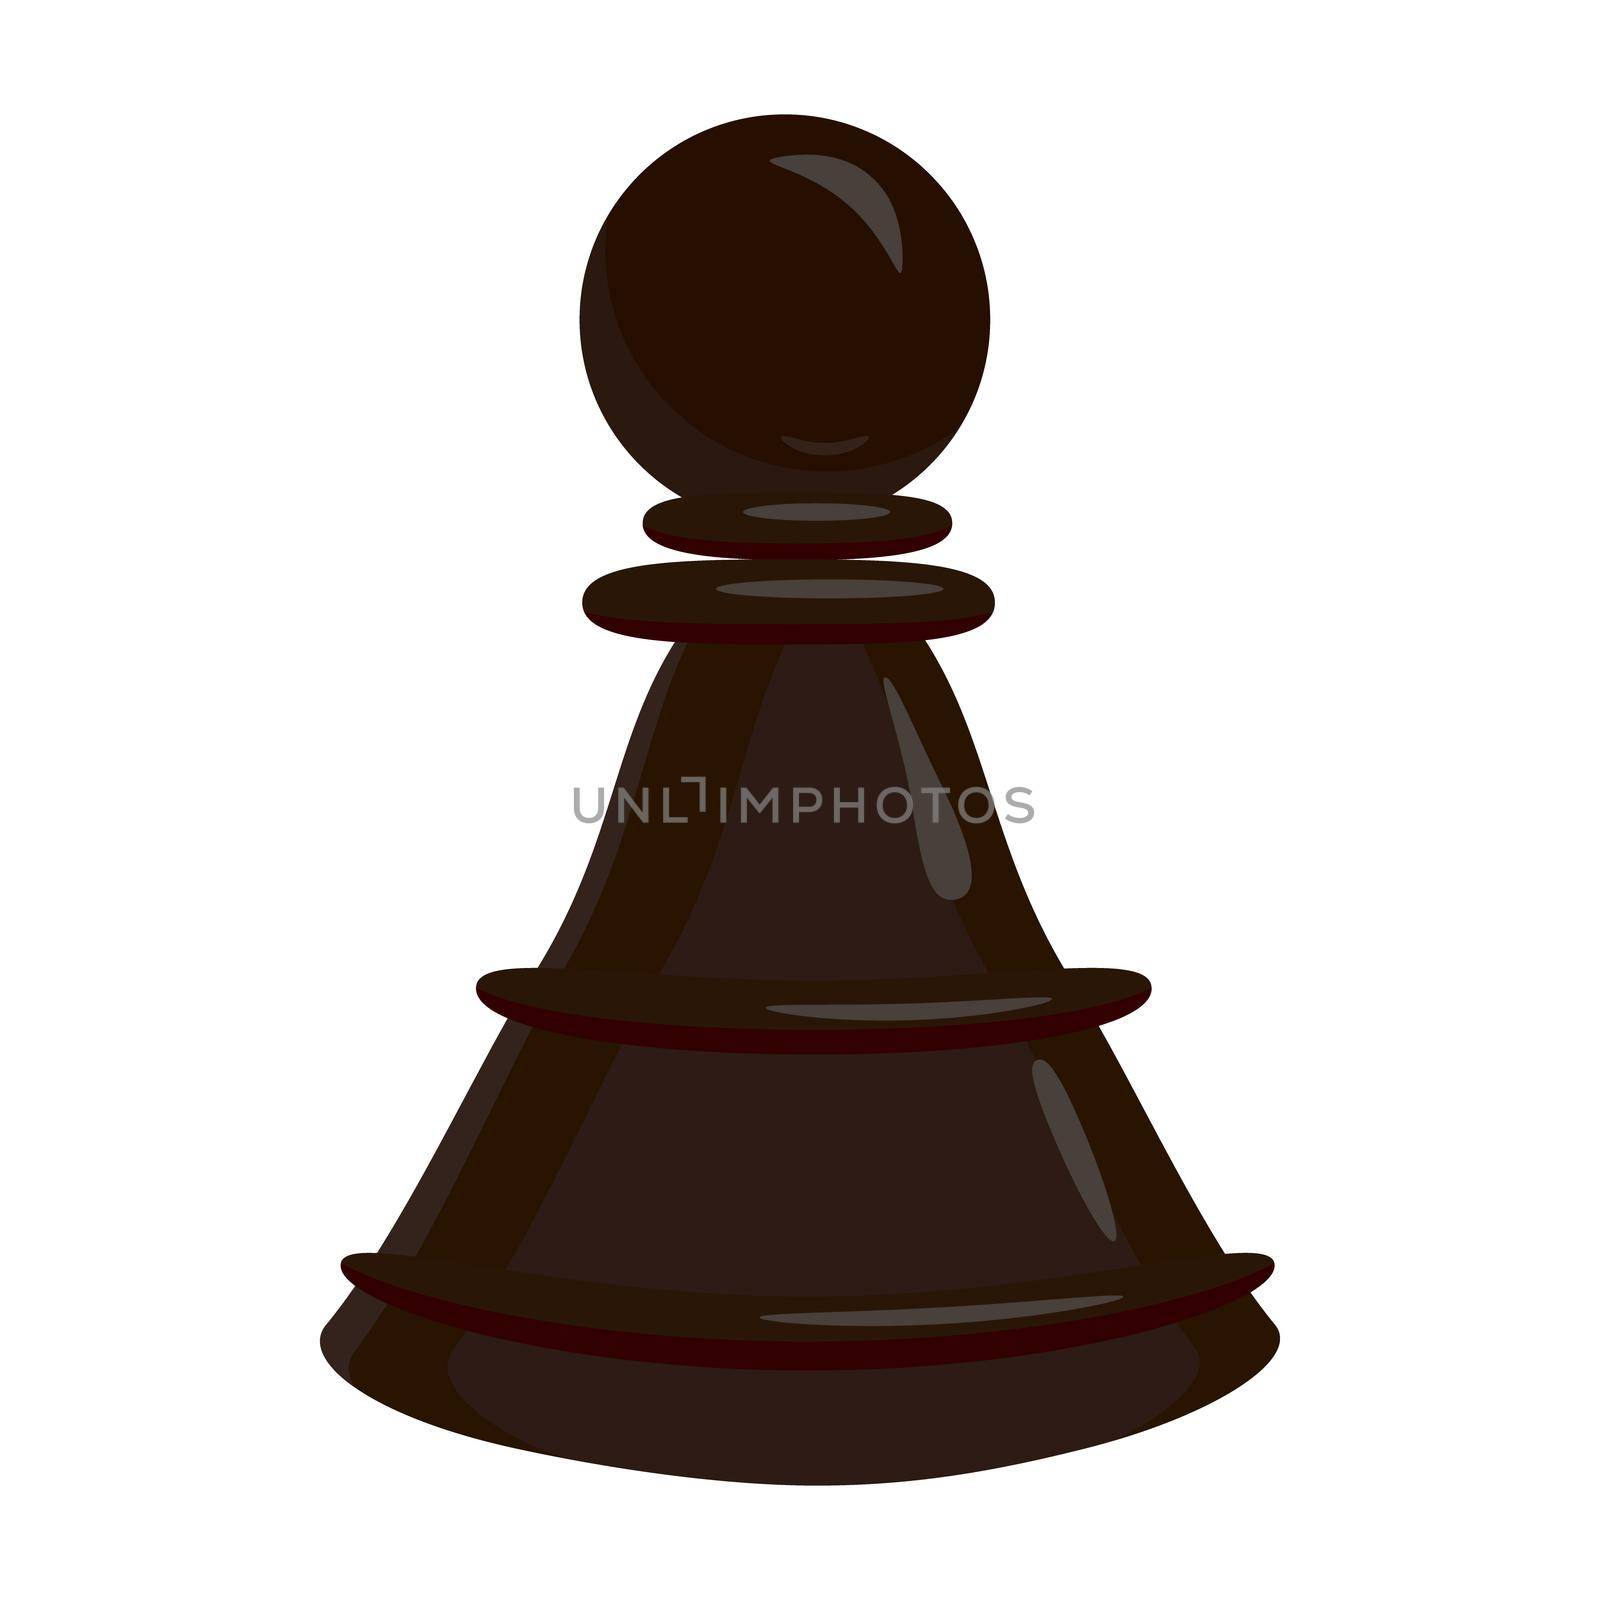 Chess pawn icon in cartoon style on a white background